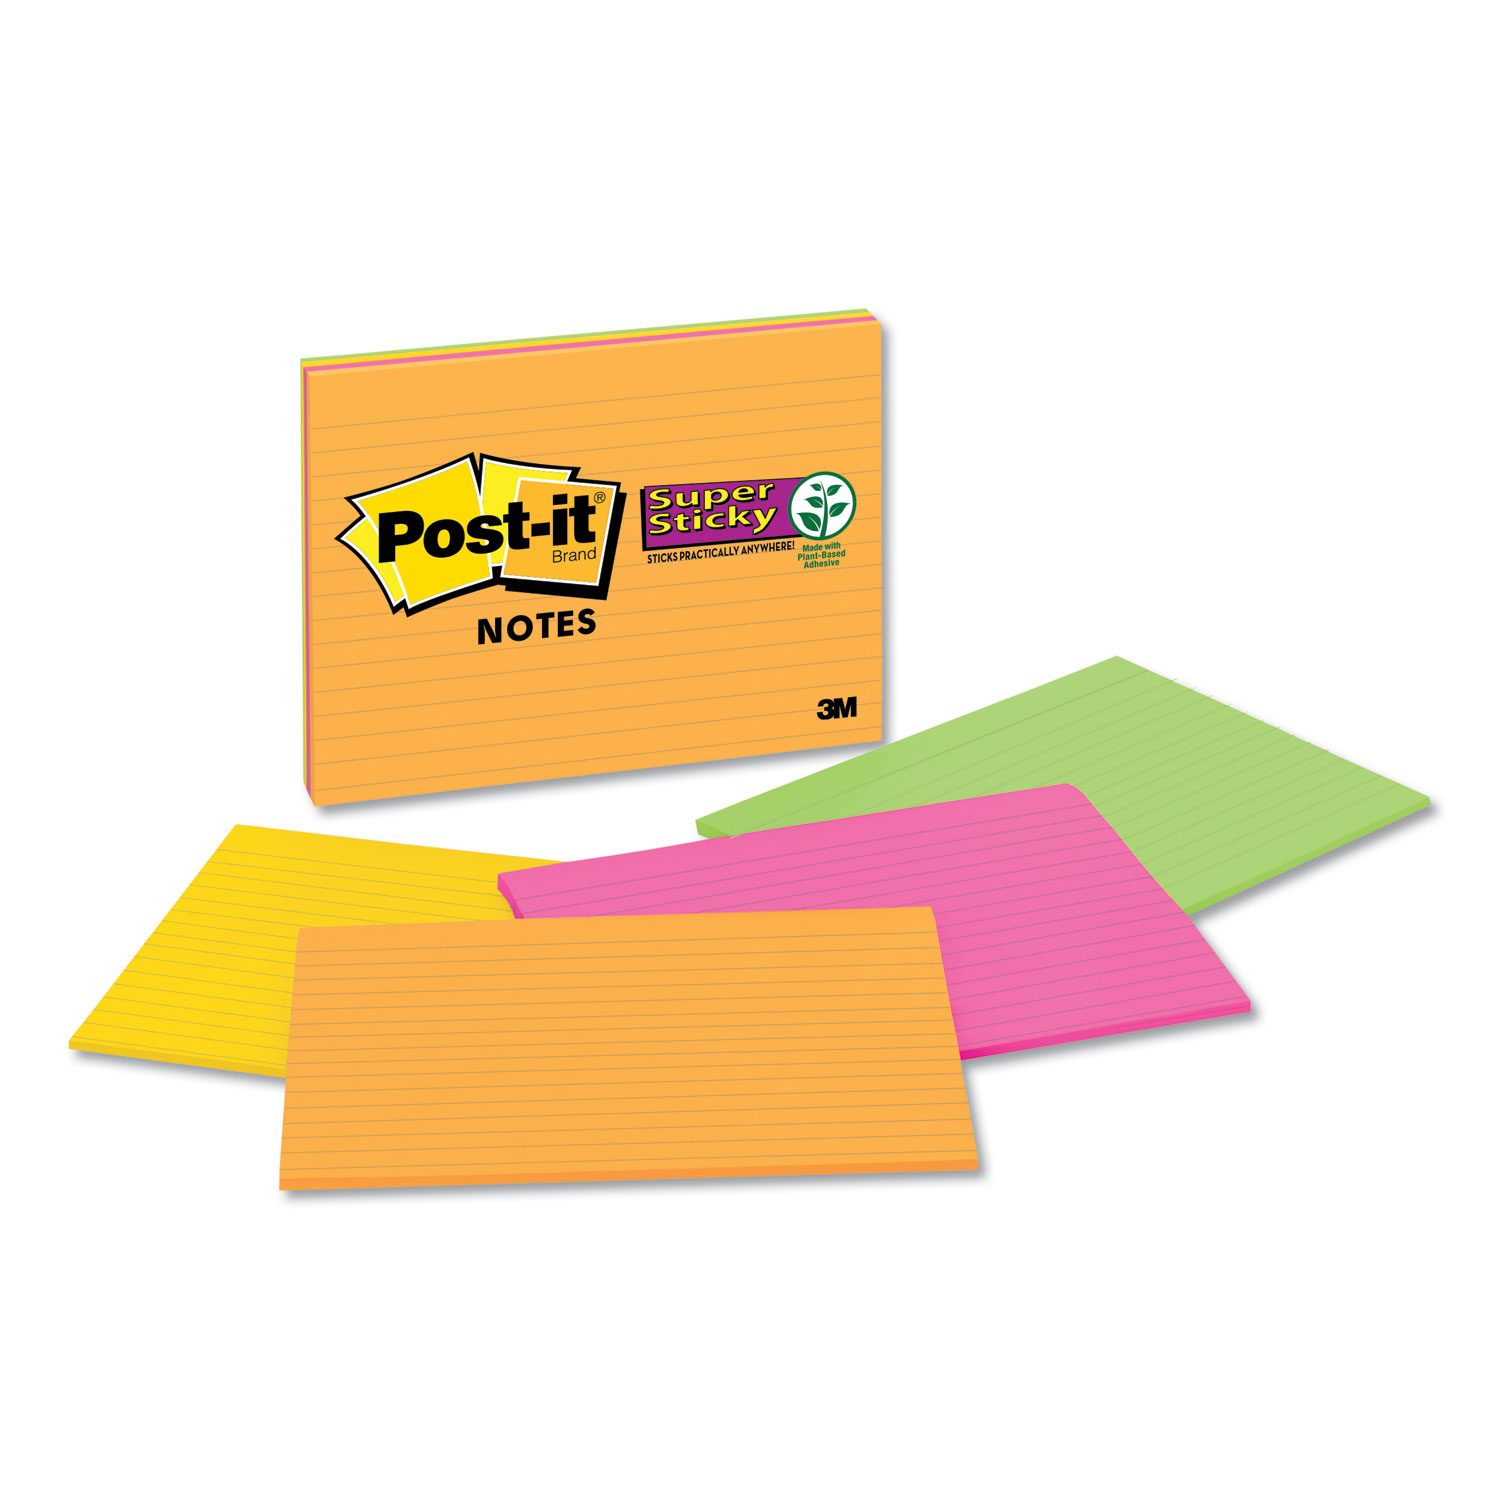  Post-it Notes Super Sticky 6845-SSPL Meeting Notes in Rio de Janeiro Colors, Lined, 8 x 6, 45-Sheet, 4/Pack (MMM6845SSPL) 